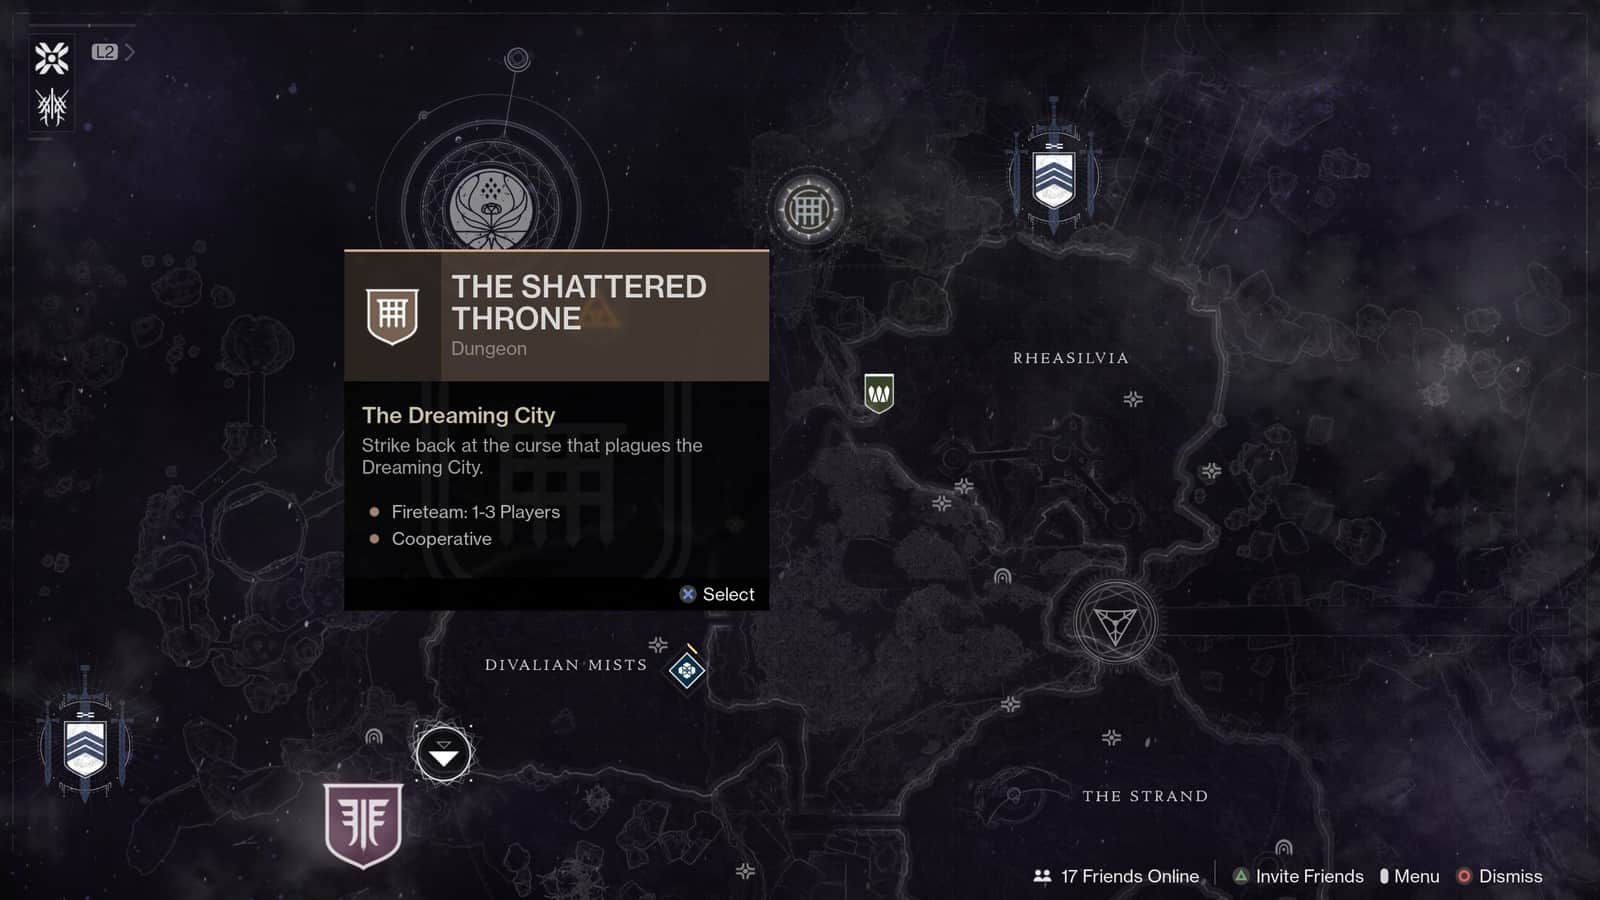 Shattered Throne Destiny 2 featured